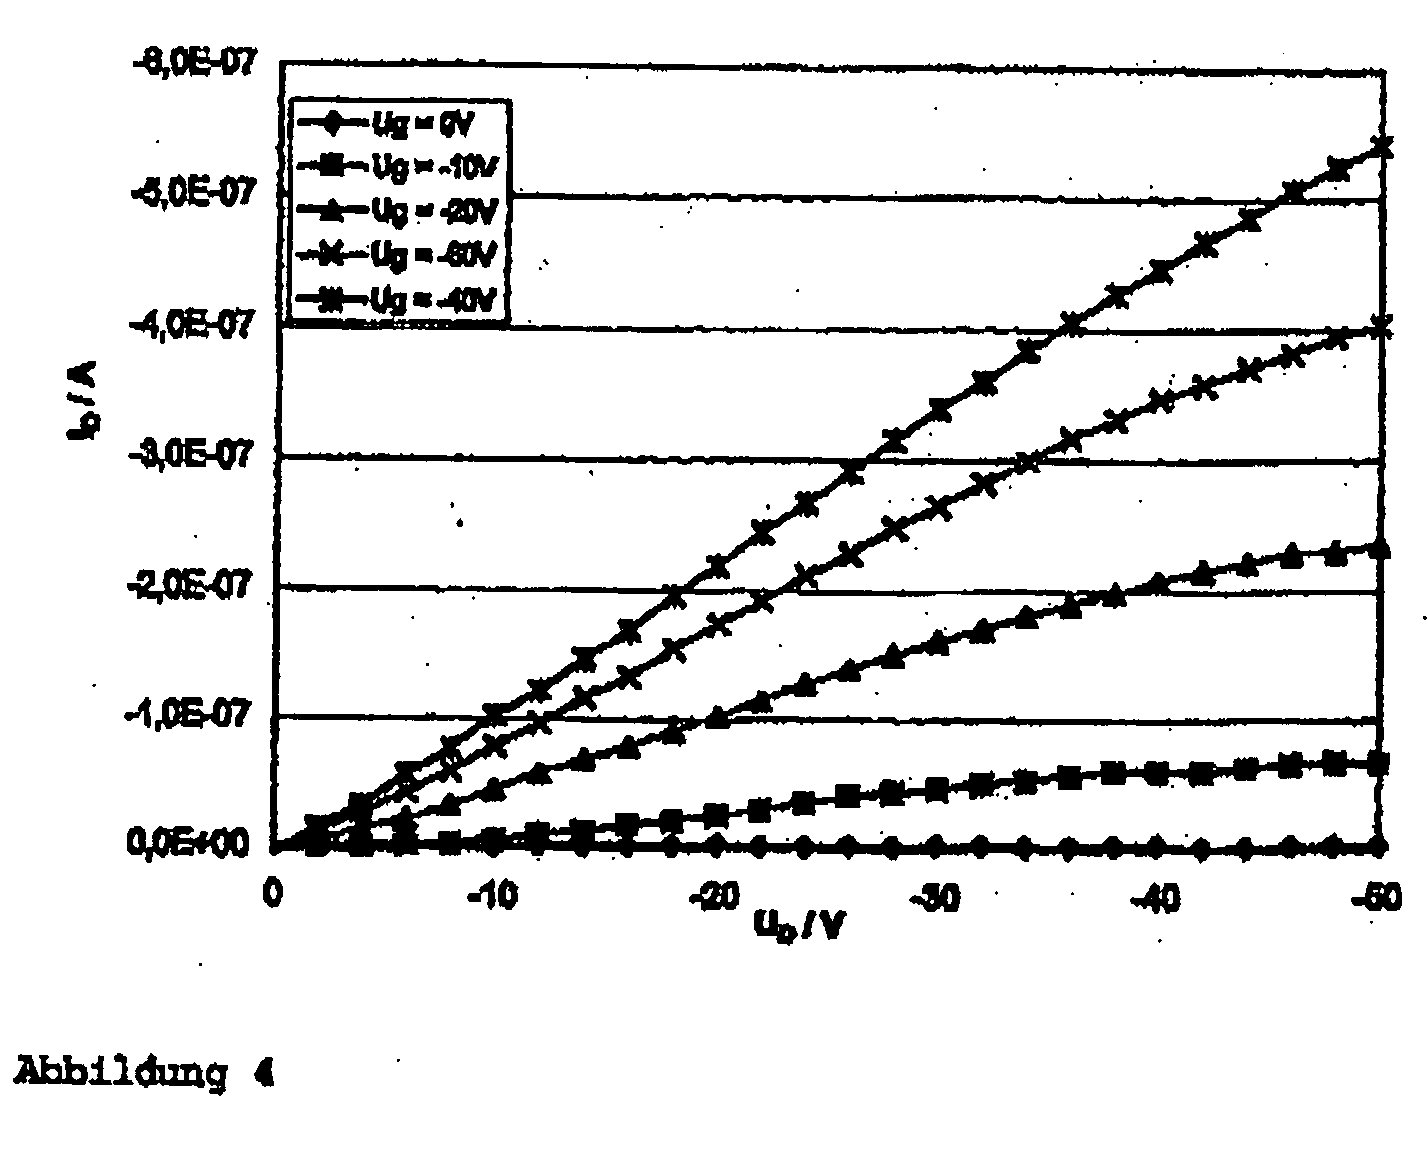 Method for producing organic electronic devices on solvent-and/or temperature-sensitive plastic substrates